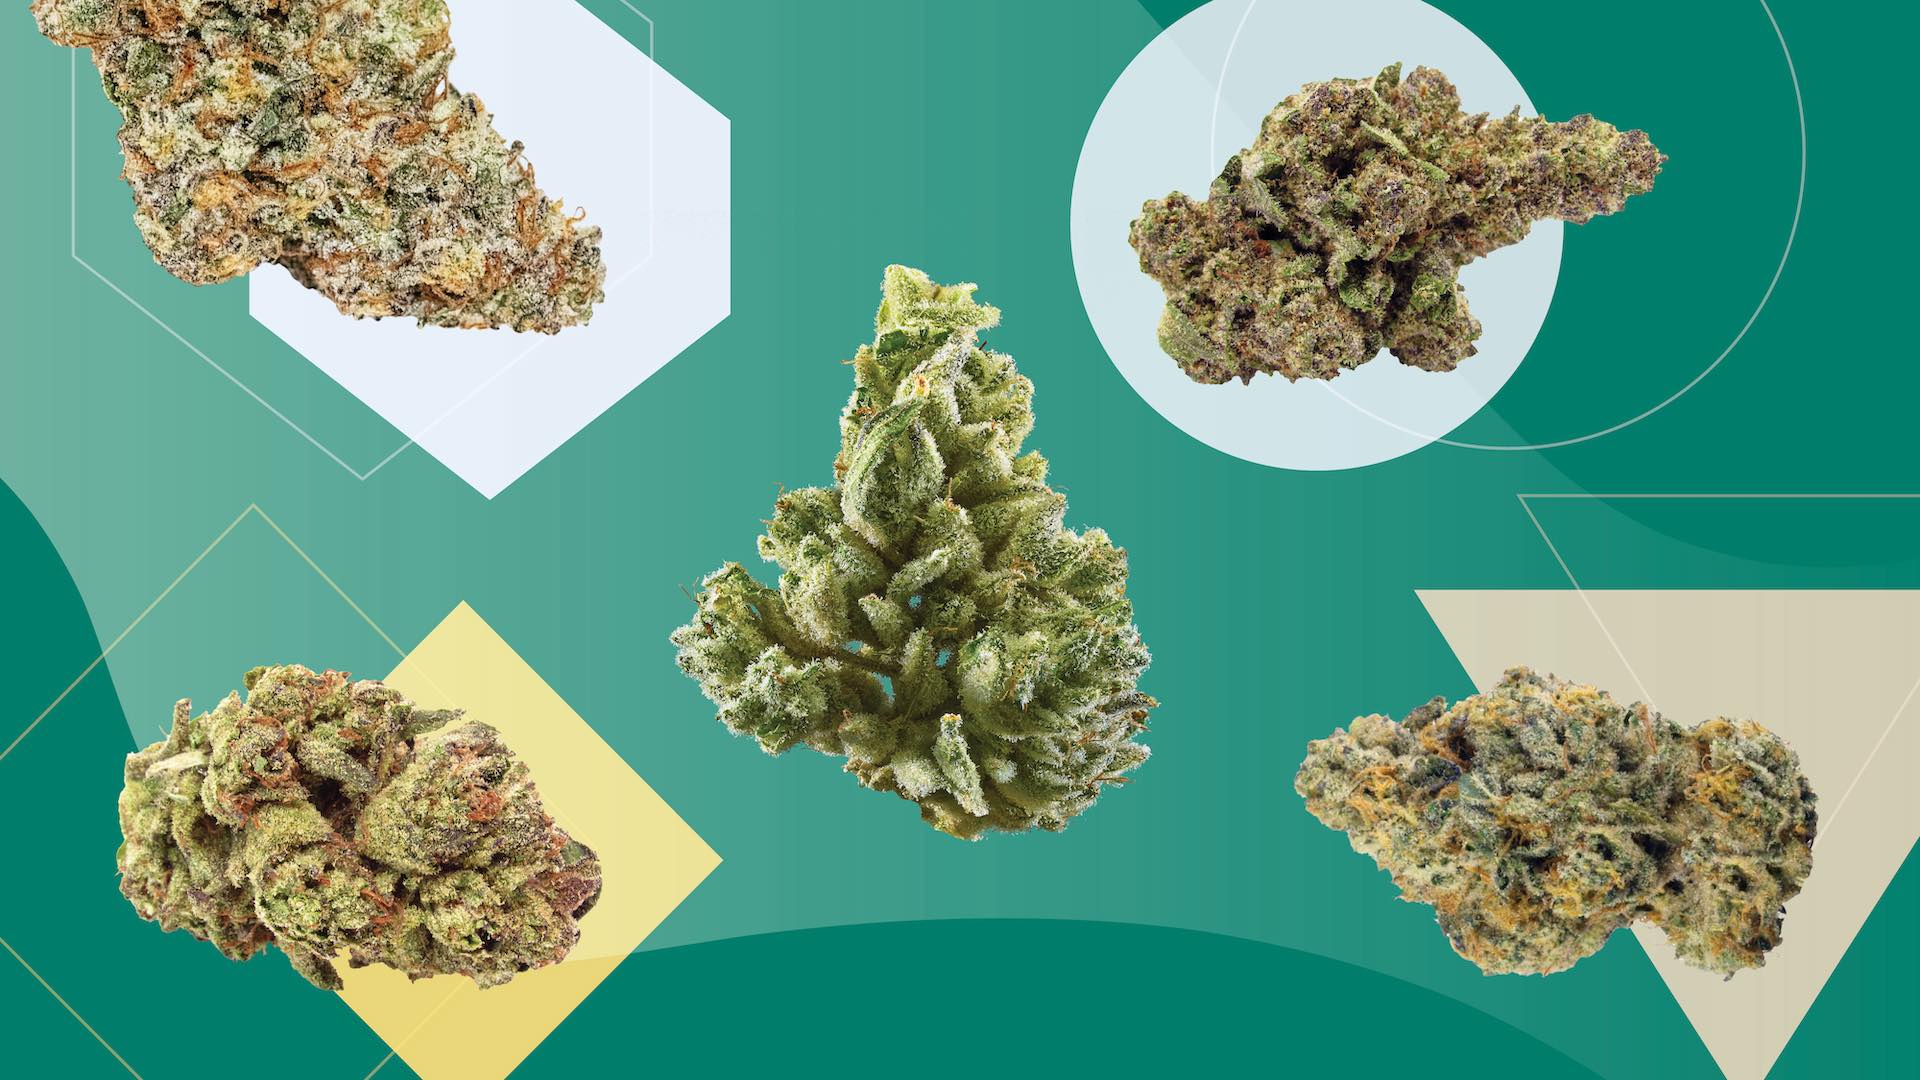 Is it True That Different Cannabis Strains Cause Different Effects?